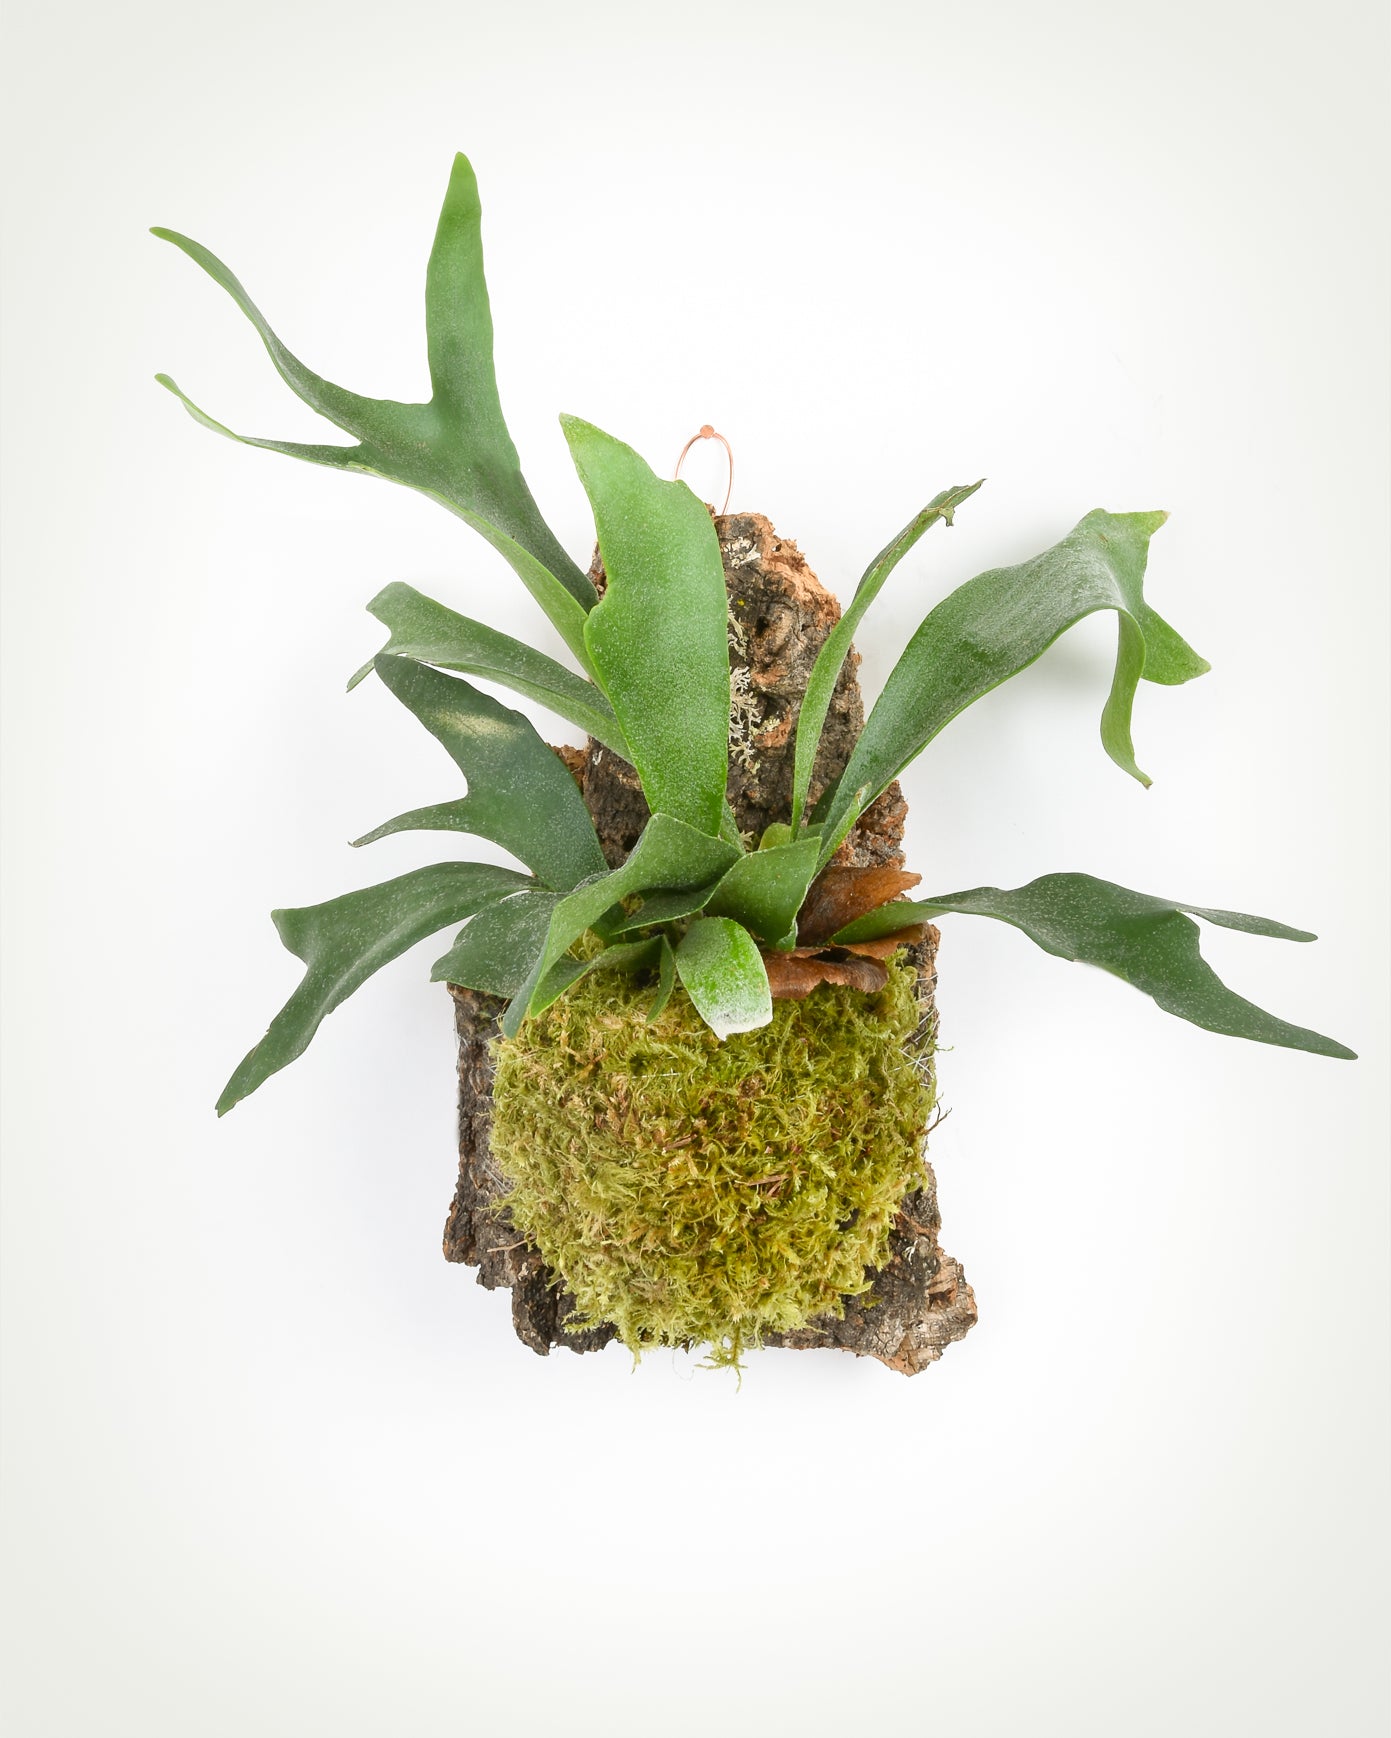 Platycerium mounted onto natural cork with bright green moss